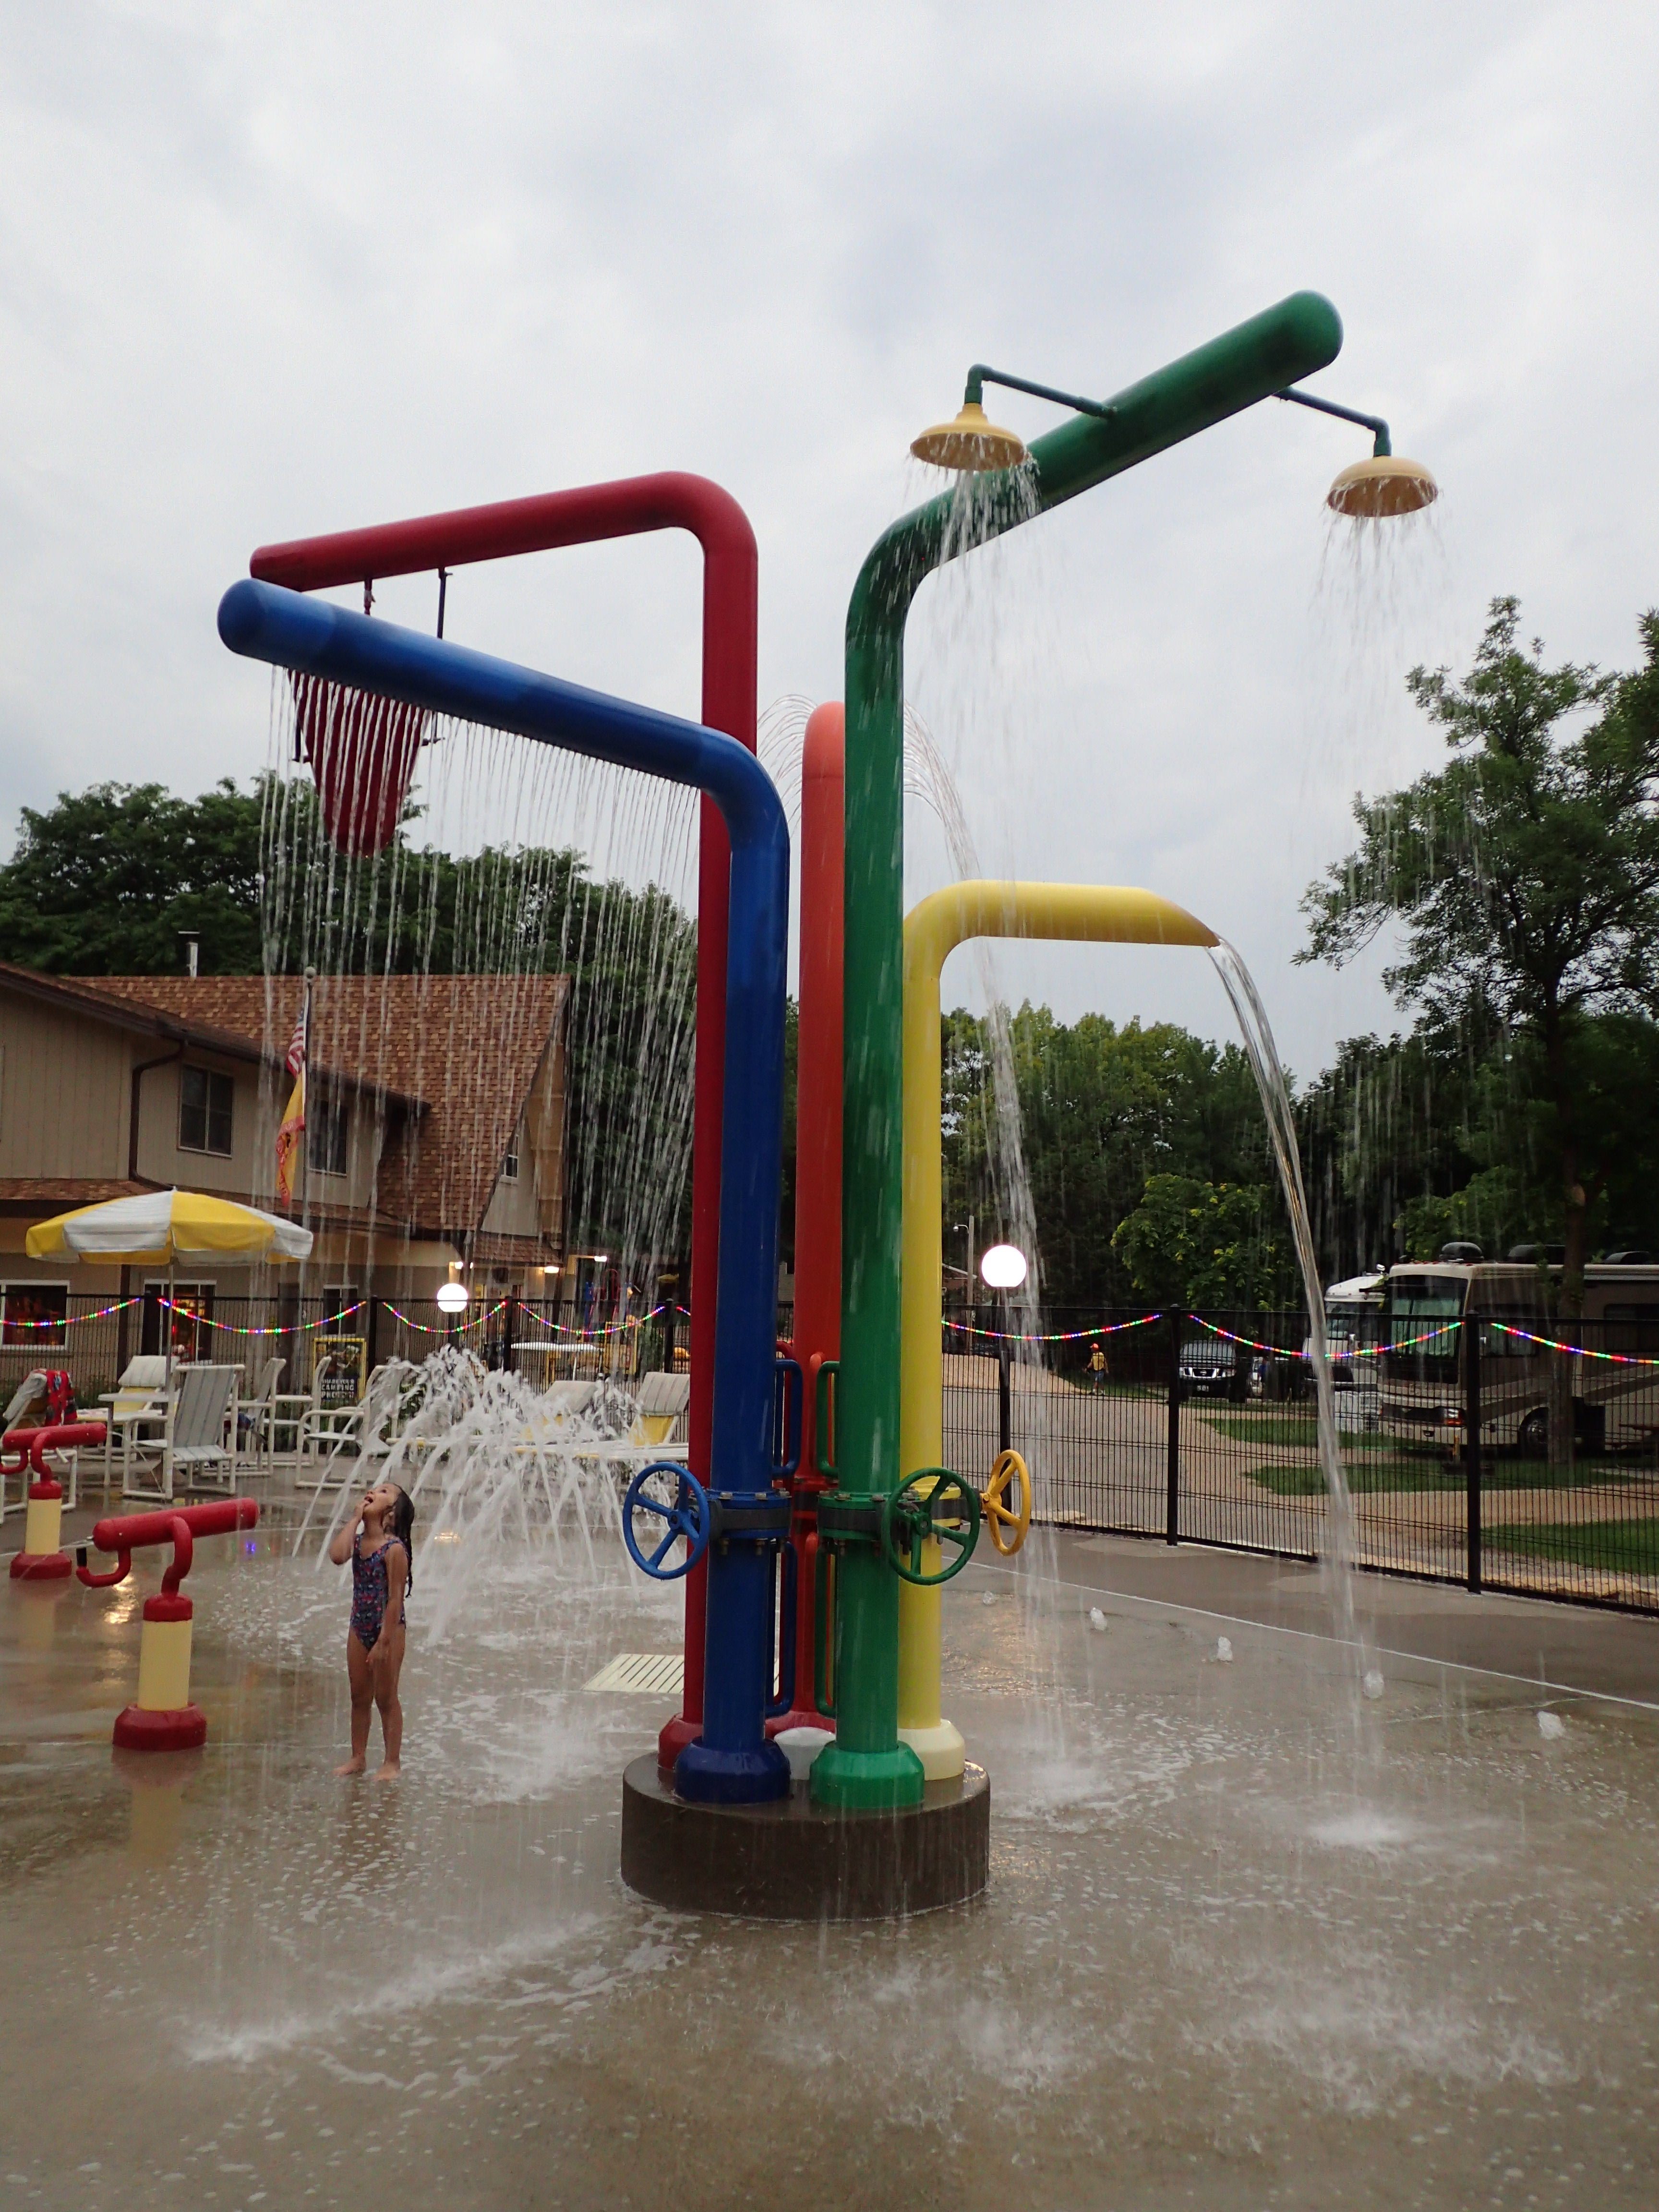 The splash pad at the pool within the campground